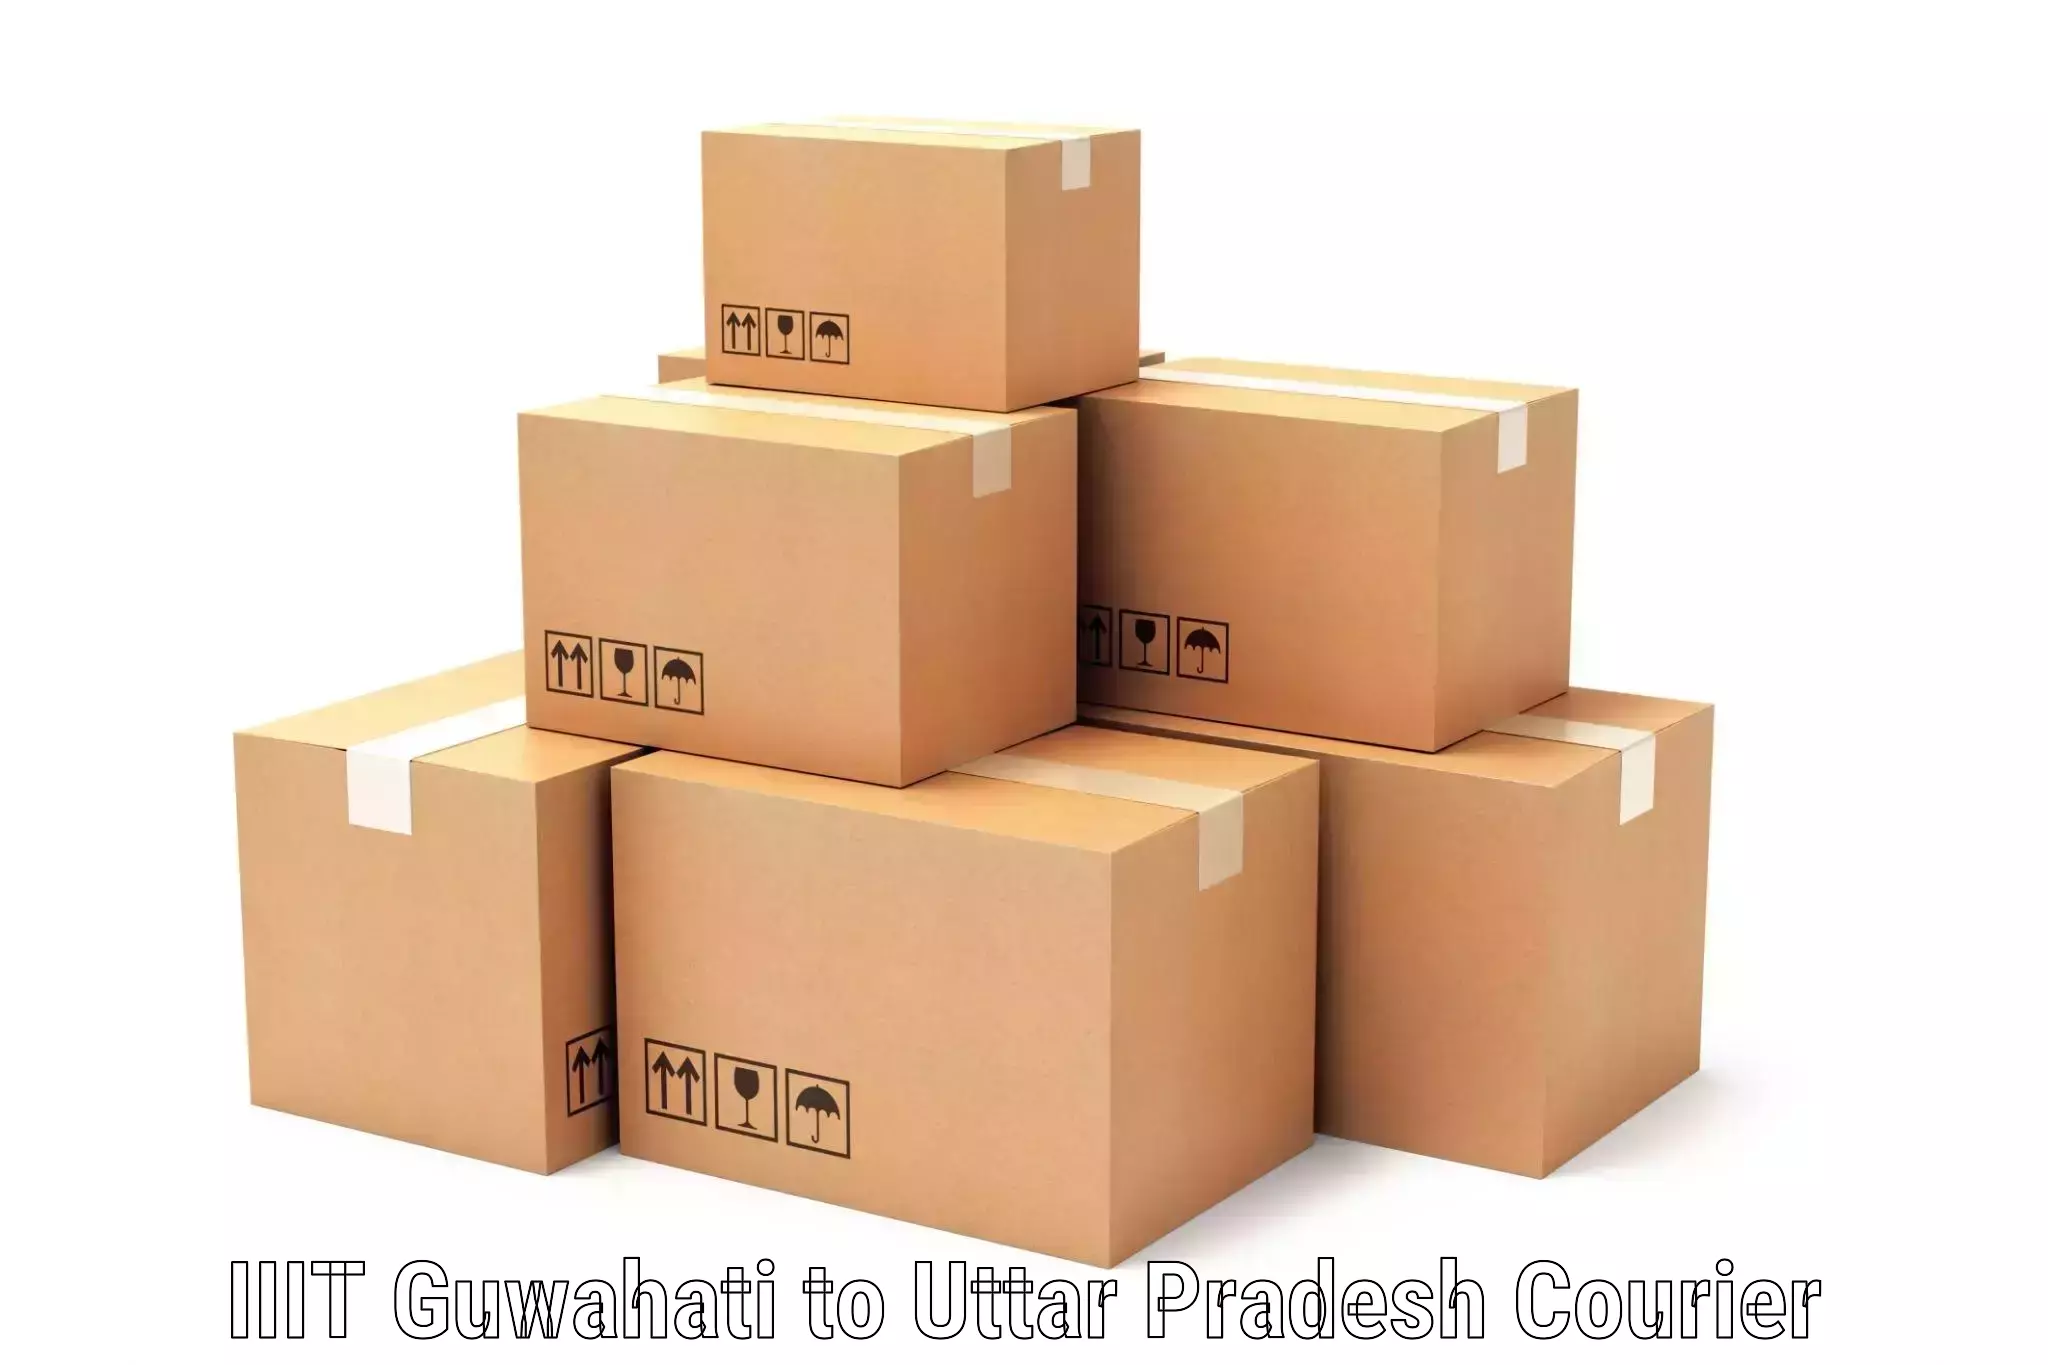 Quality courier partnerships IIIT Guwahati to Bareilly